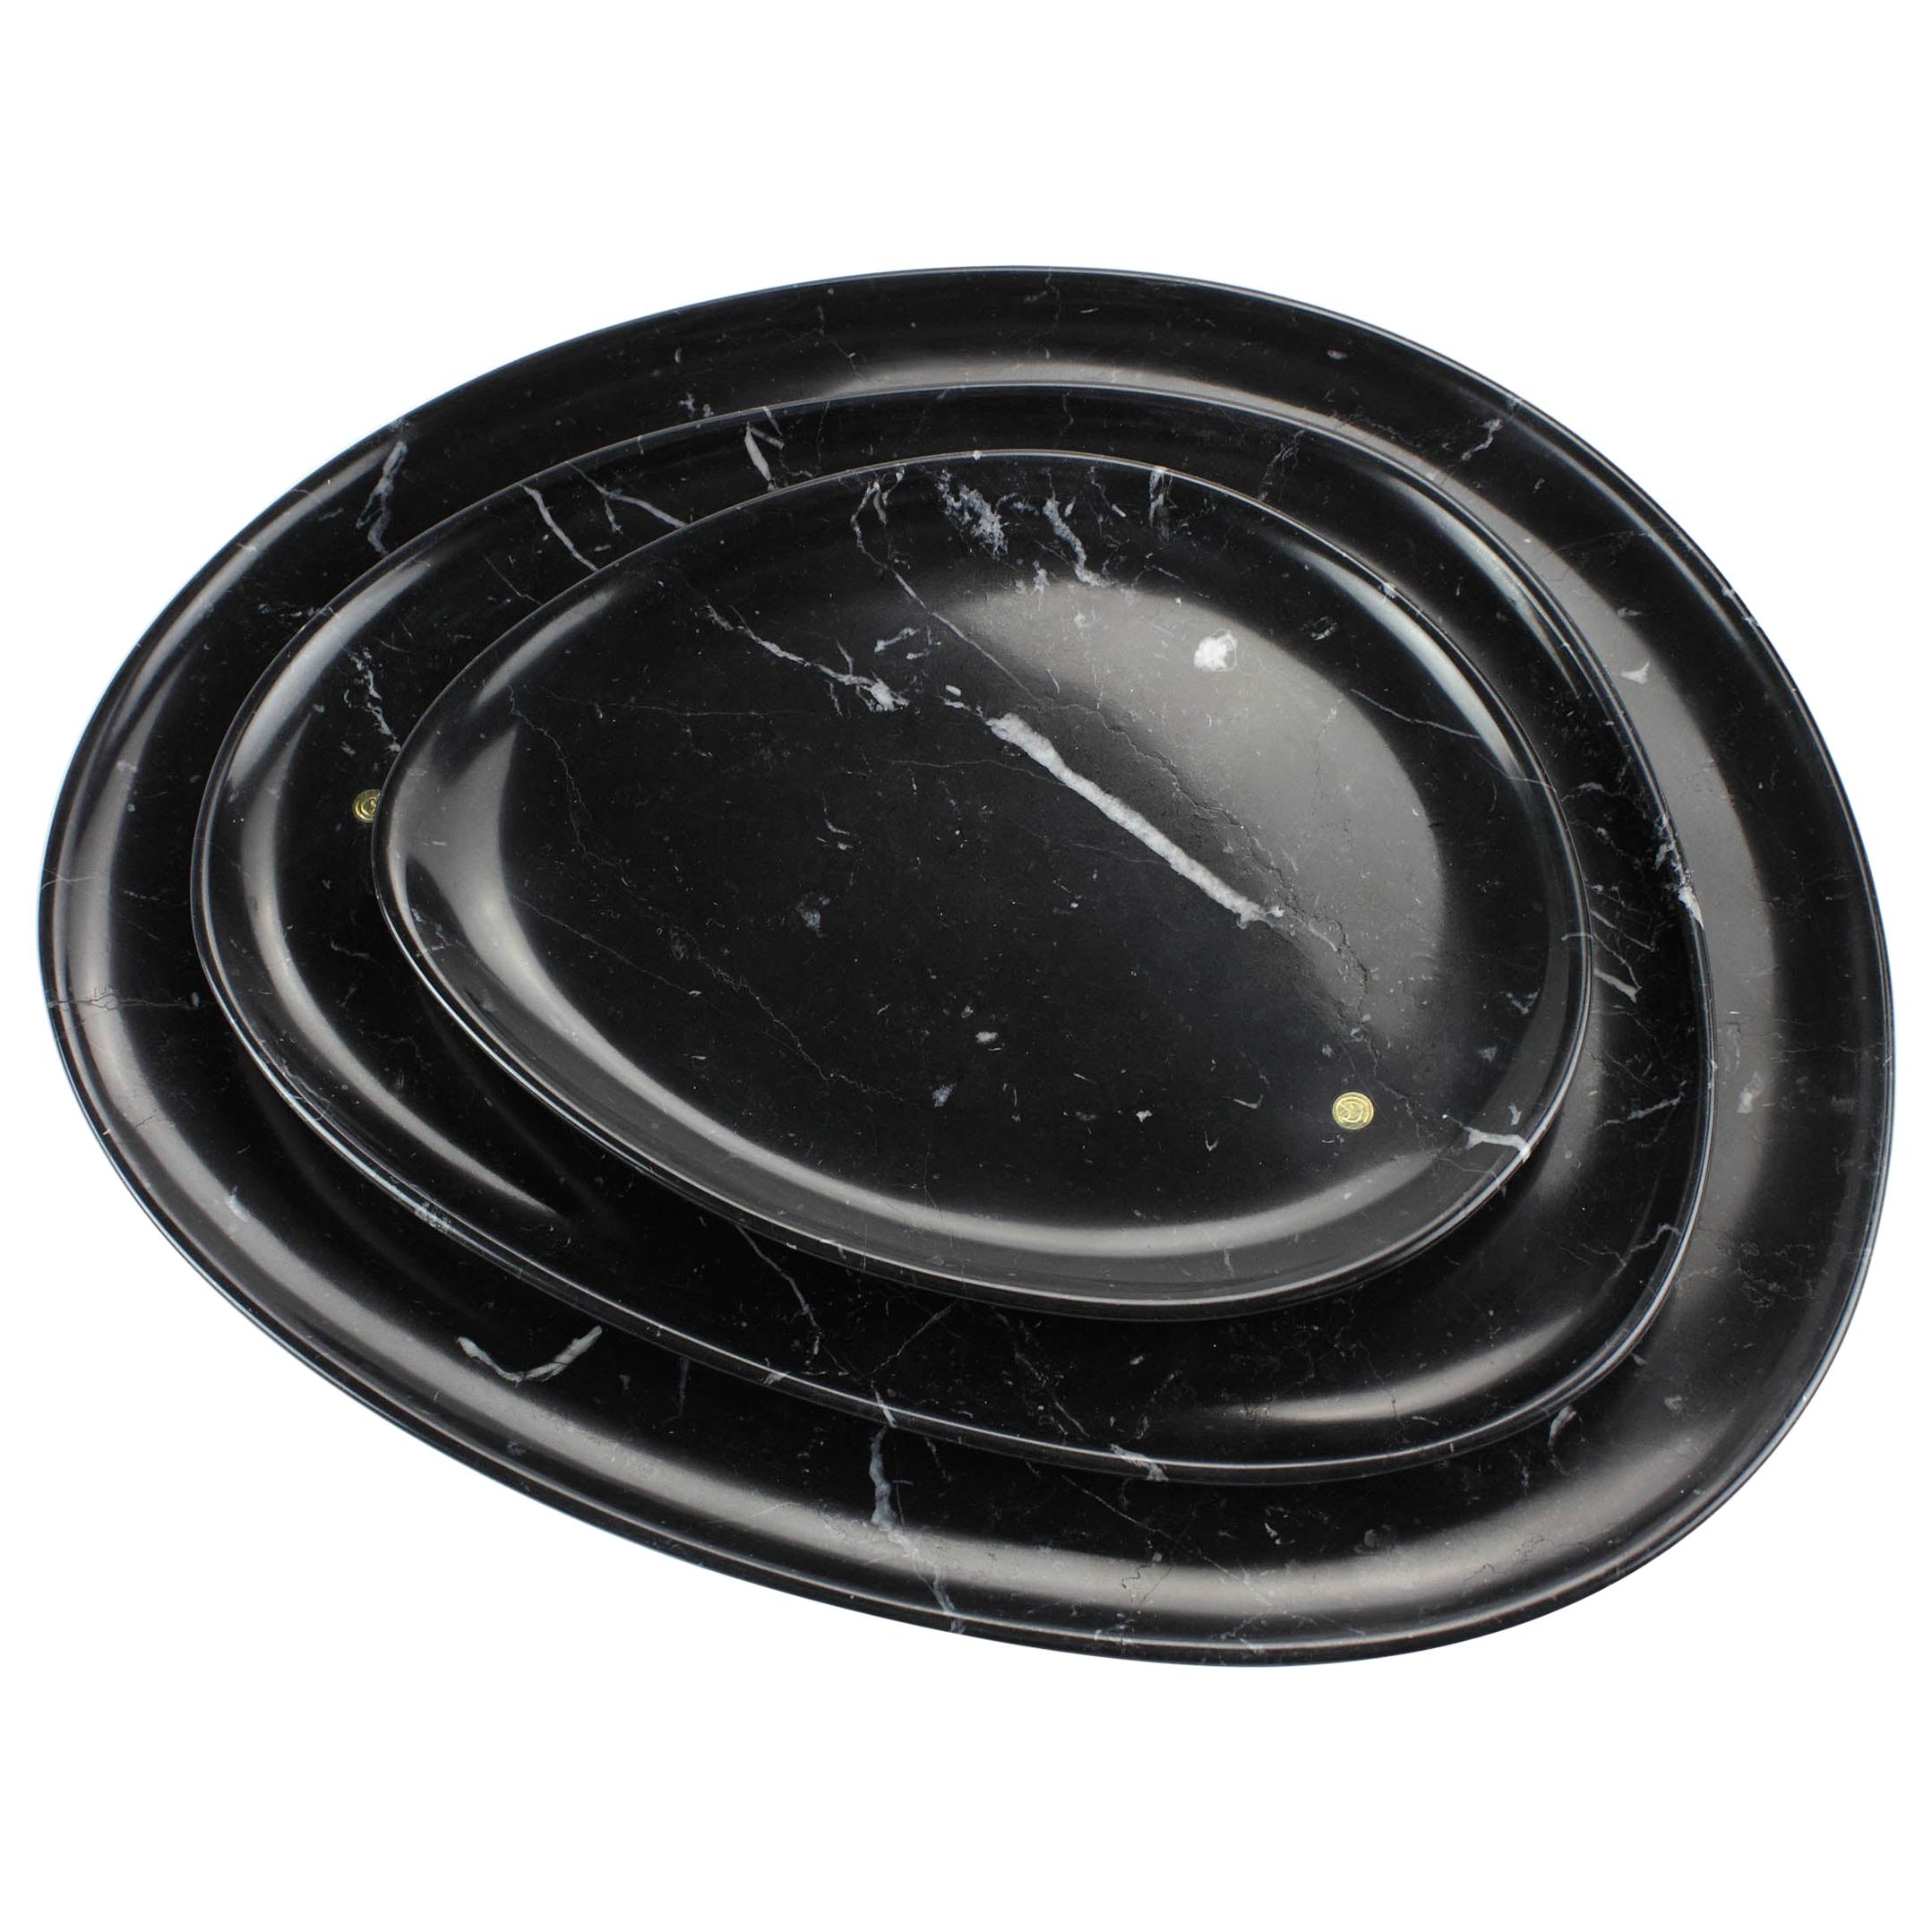 Plates Platters Serveware Set Black Marquina Marble Collectible Handmade Italy